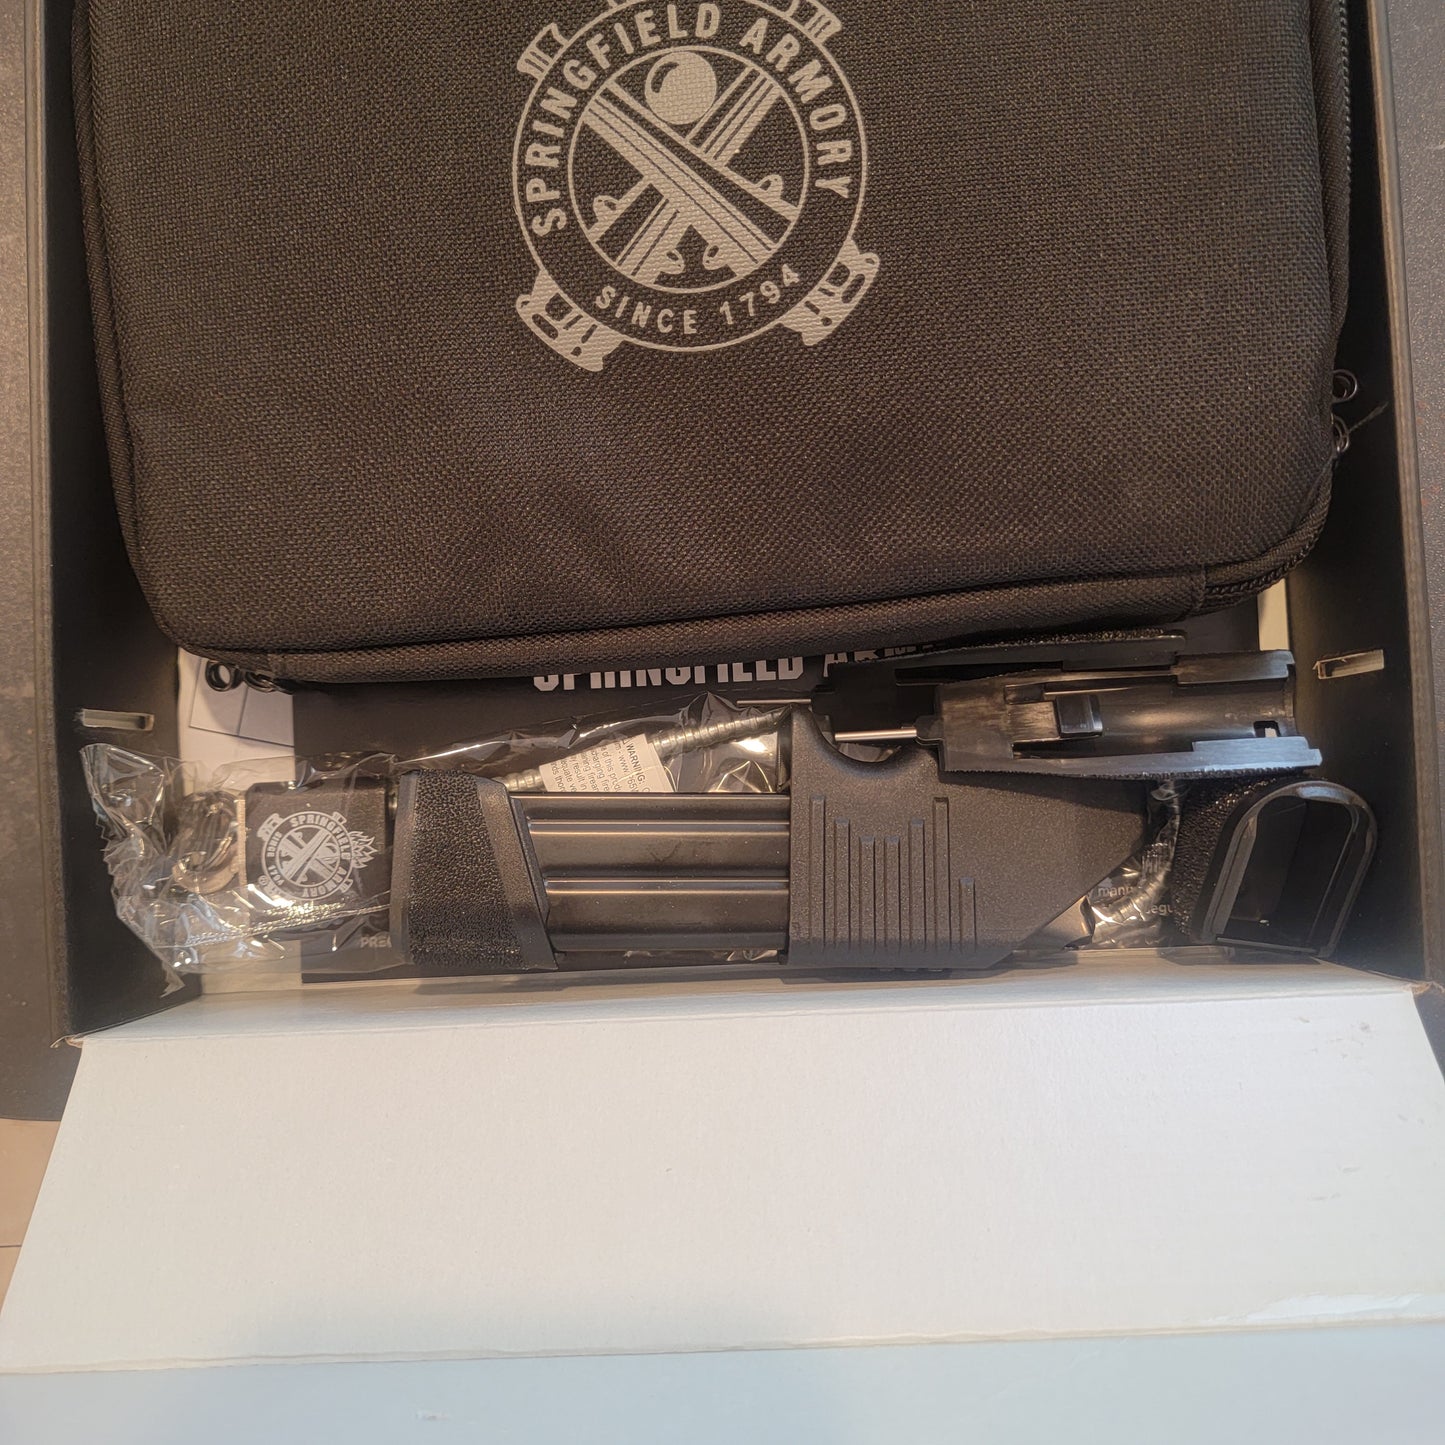 Springfield Armory Echelon 4.5" Black with FDE Grip mod 17/20rd OR